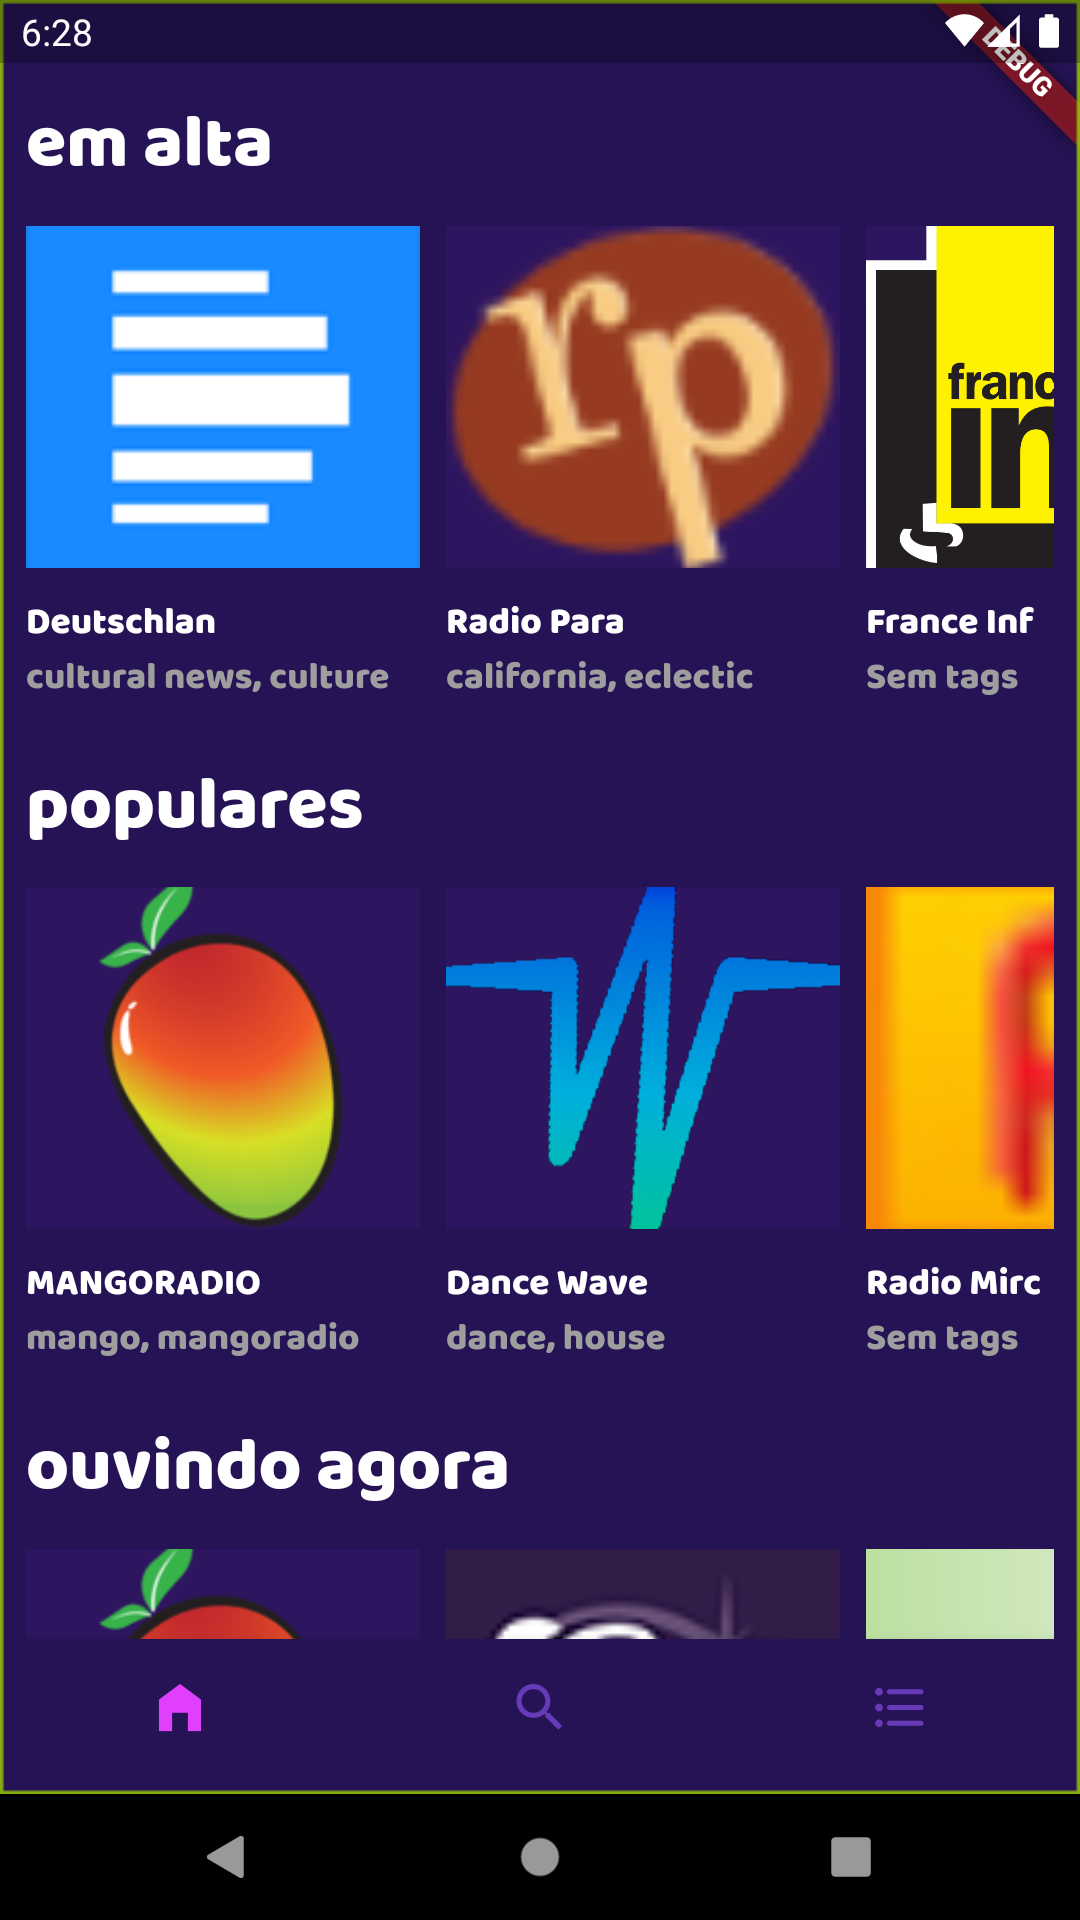 Radiao - A radio explorer app that lets you listen to several stations of various countries